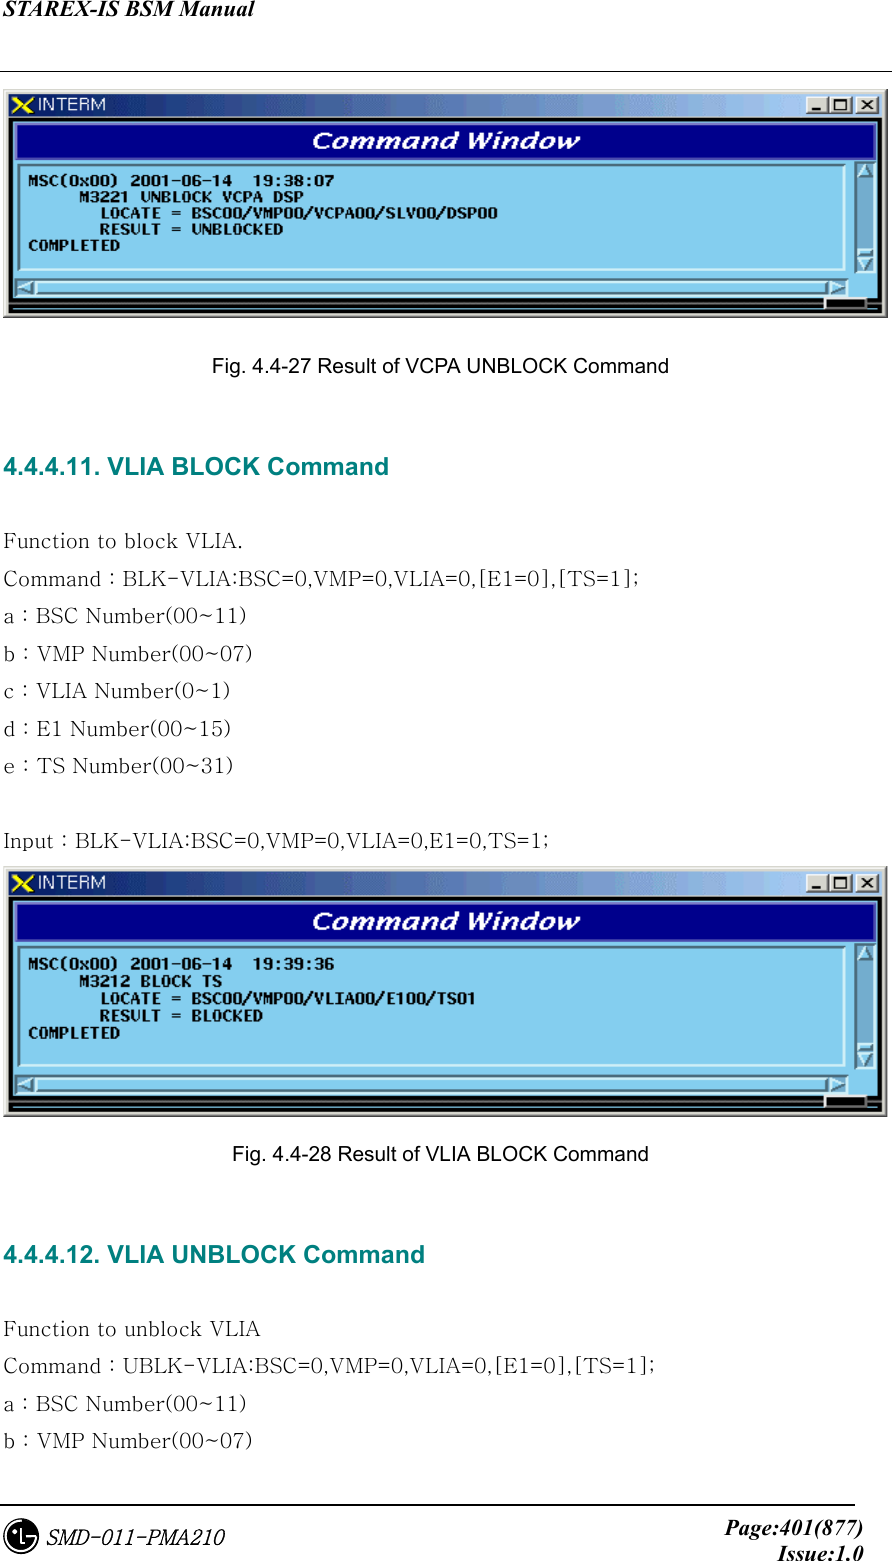 STAREX-IS BSM Manual     Page:401(877)Issue:1.0SMD-011-PMA210  Fig. 4.4-27 Result of VCPA UNBLOCK Command  4.4.4.11. VLIA BLOCK Command  Function to block VLIA. Command : BLK-VLIA:BSC=0,VMP=0,VLIA=0,[E1=0],[TS=1]; a : BSC Number(00~11) b : VMP Number(00~07) c : VLIA Number(0~1) d : E1 Number(00~15) e : TS Number(00~31)  Input : BLK-VLIA:BSC=0,VMP=0,VLIA=0,E1=0,TS=1;  Fig. 4.4-28 Result of VLIA BLOCK Command  4.4.4.12. VLIA UNBLOCK Command  Function to unblock VLIA Command : UBLK-VLIA:BSC=0,VMP=0,VLIA=0,[E1=0],[TS=1]; a : BSC Number(00~11) b : VMP Number(00~07) 